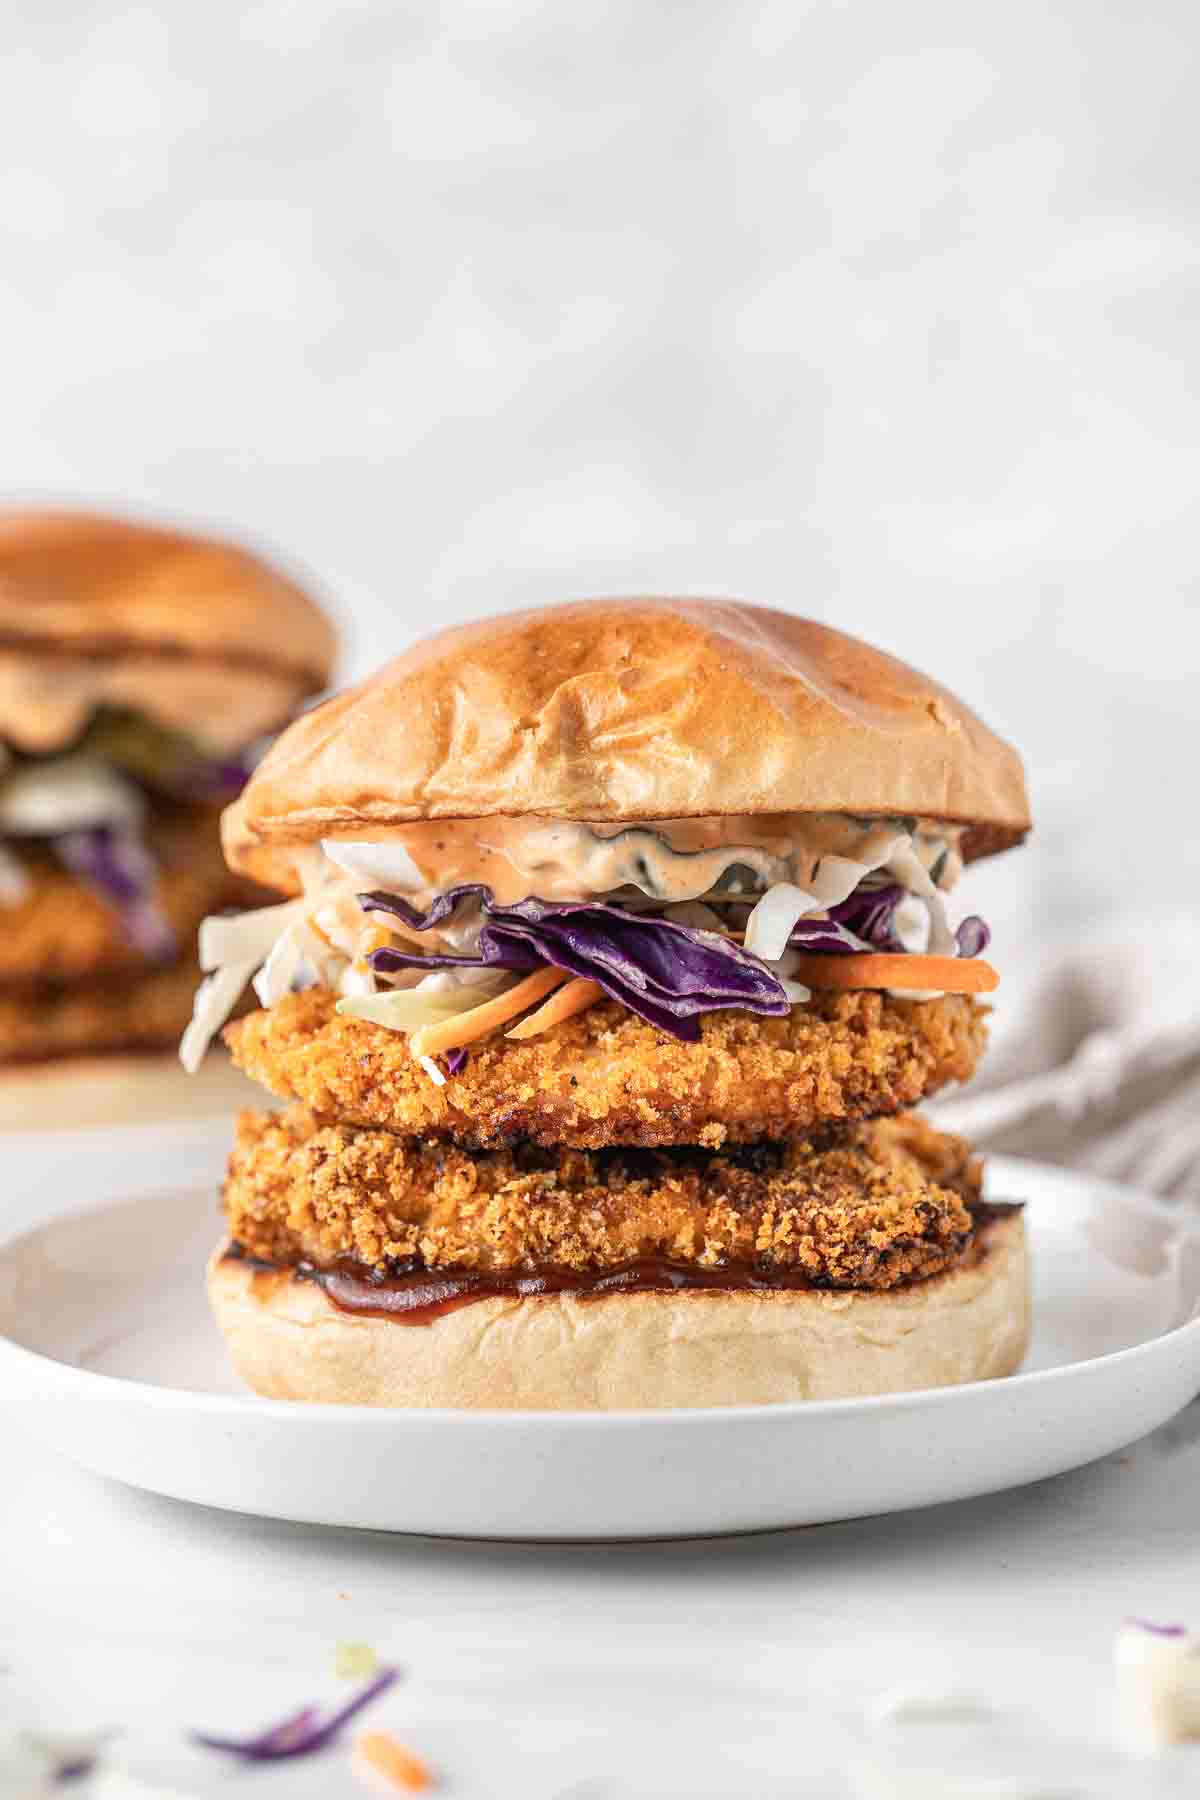 Spicy chicken burger on a white plate.